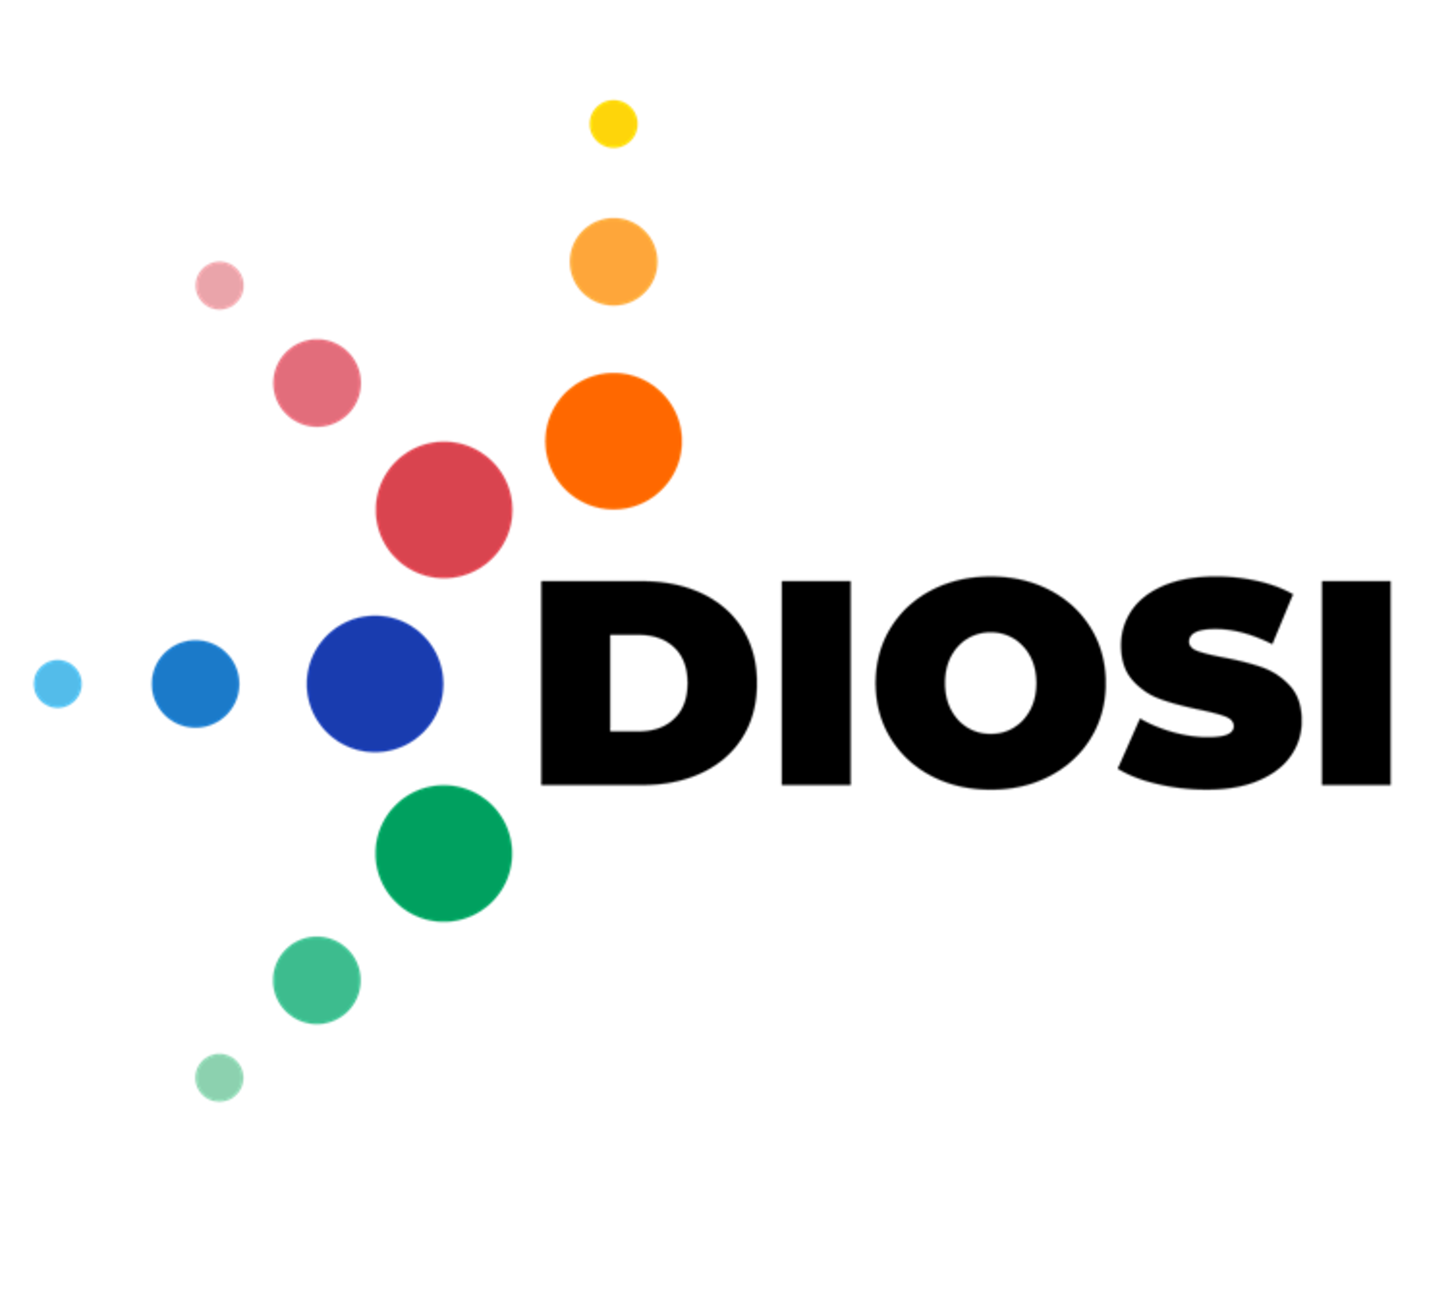 Image showing the DIOSI-logo.